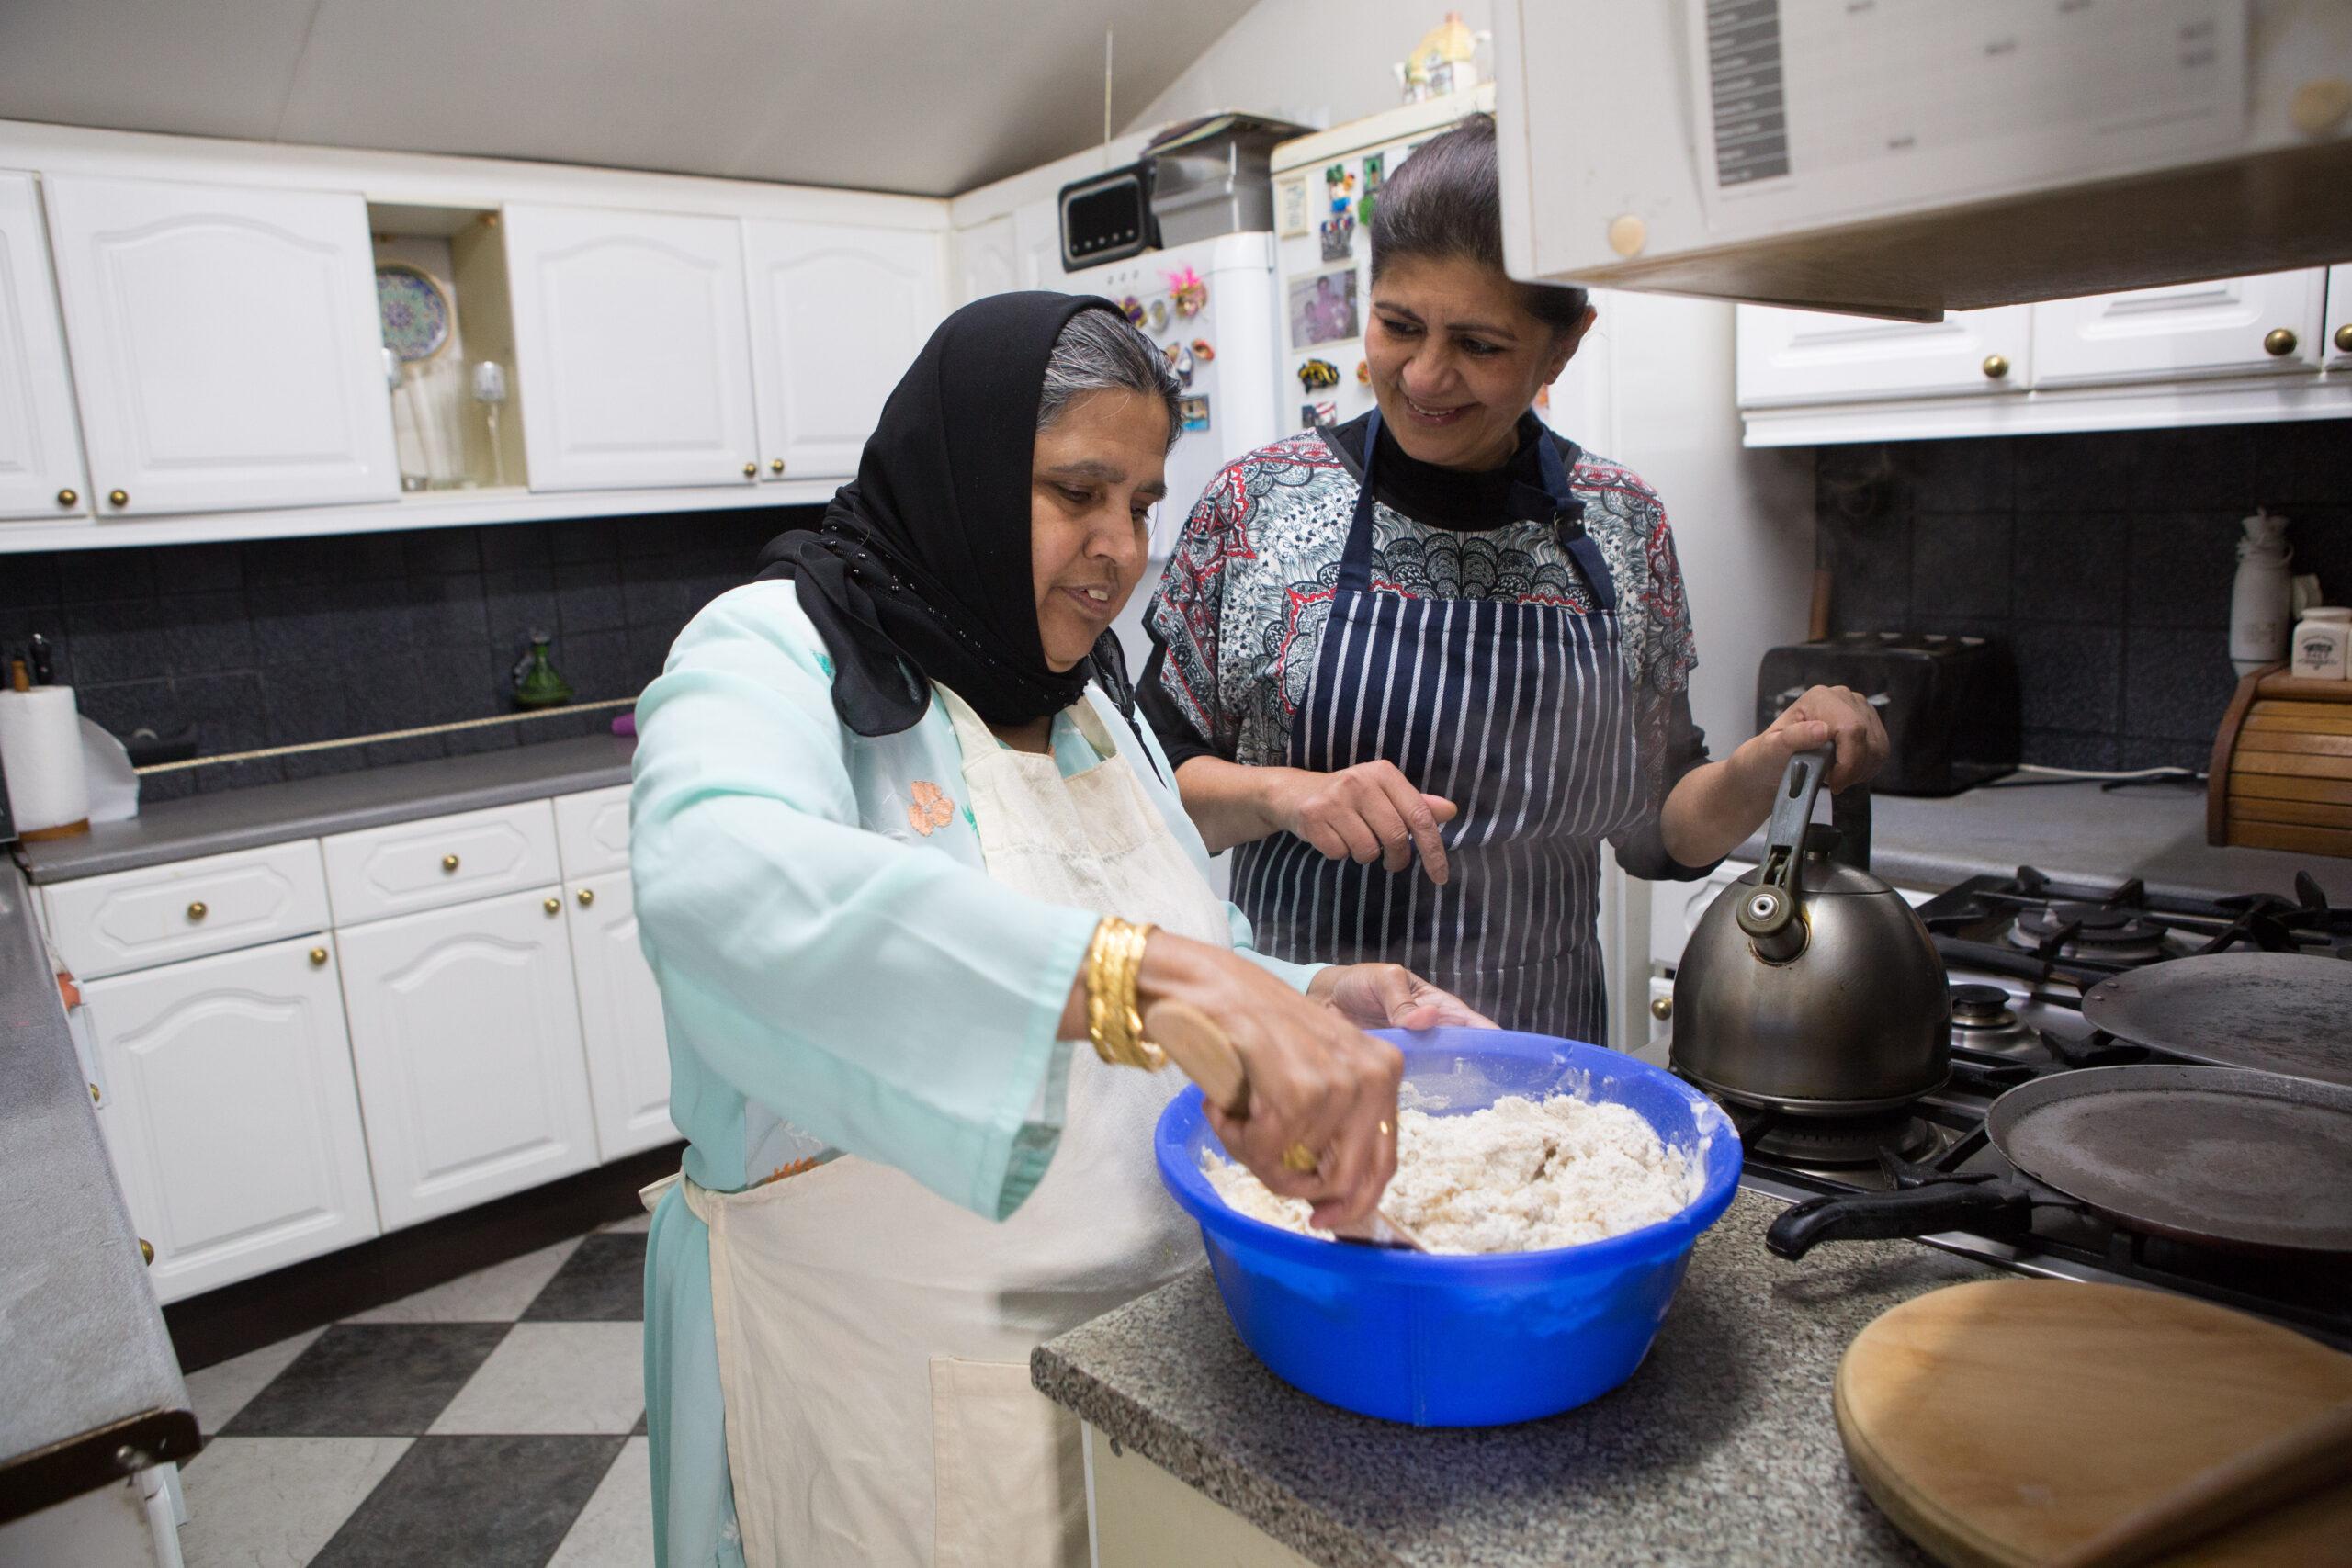 A carer helping a woman cooking in the kitchen.